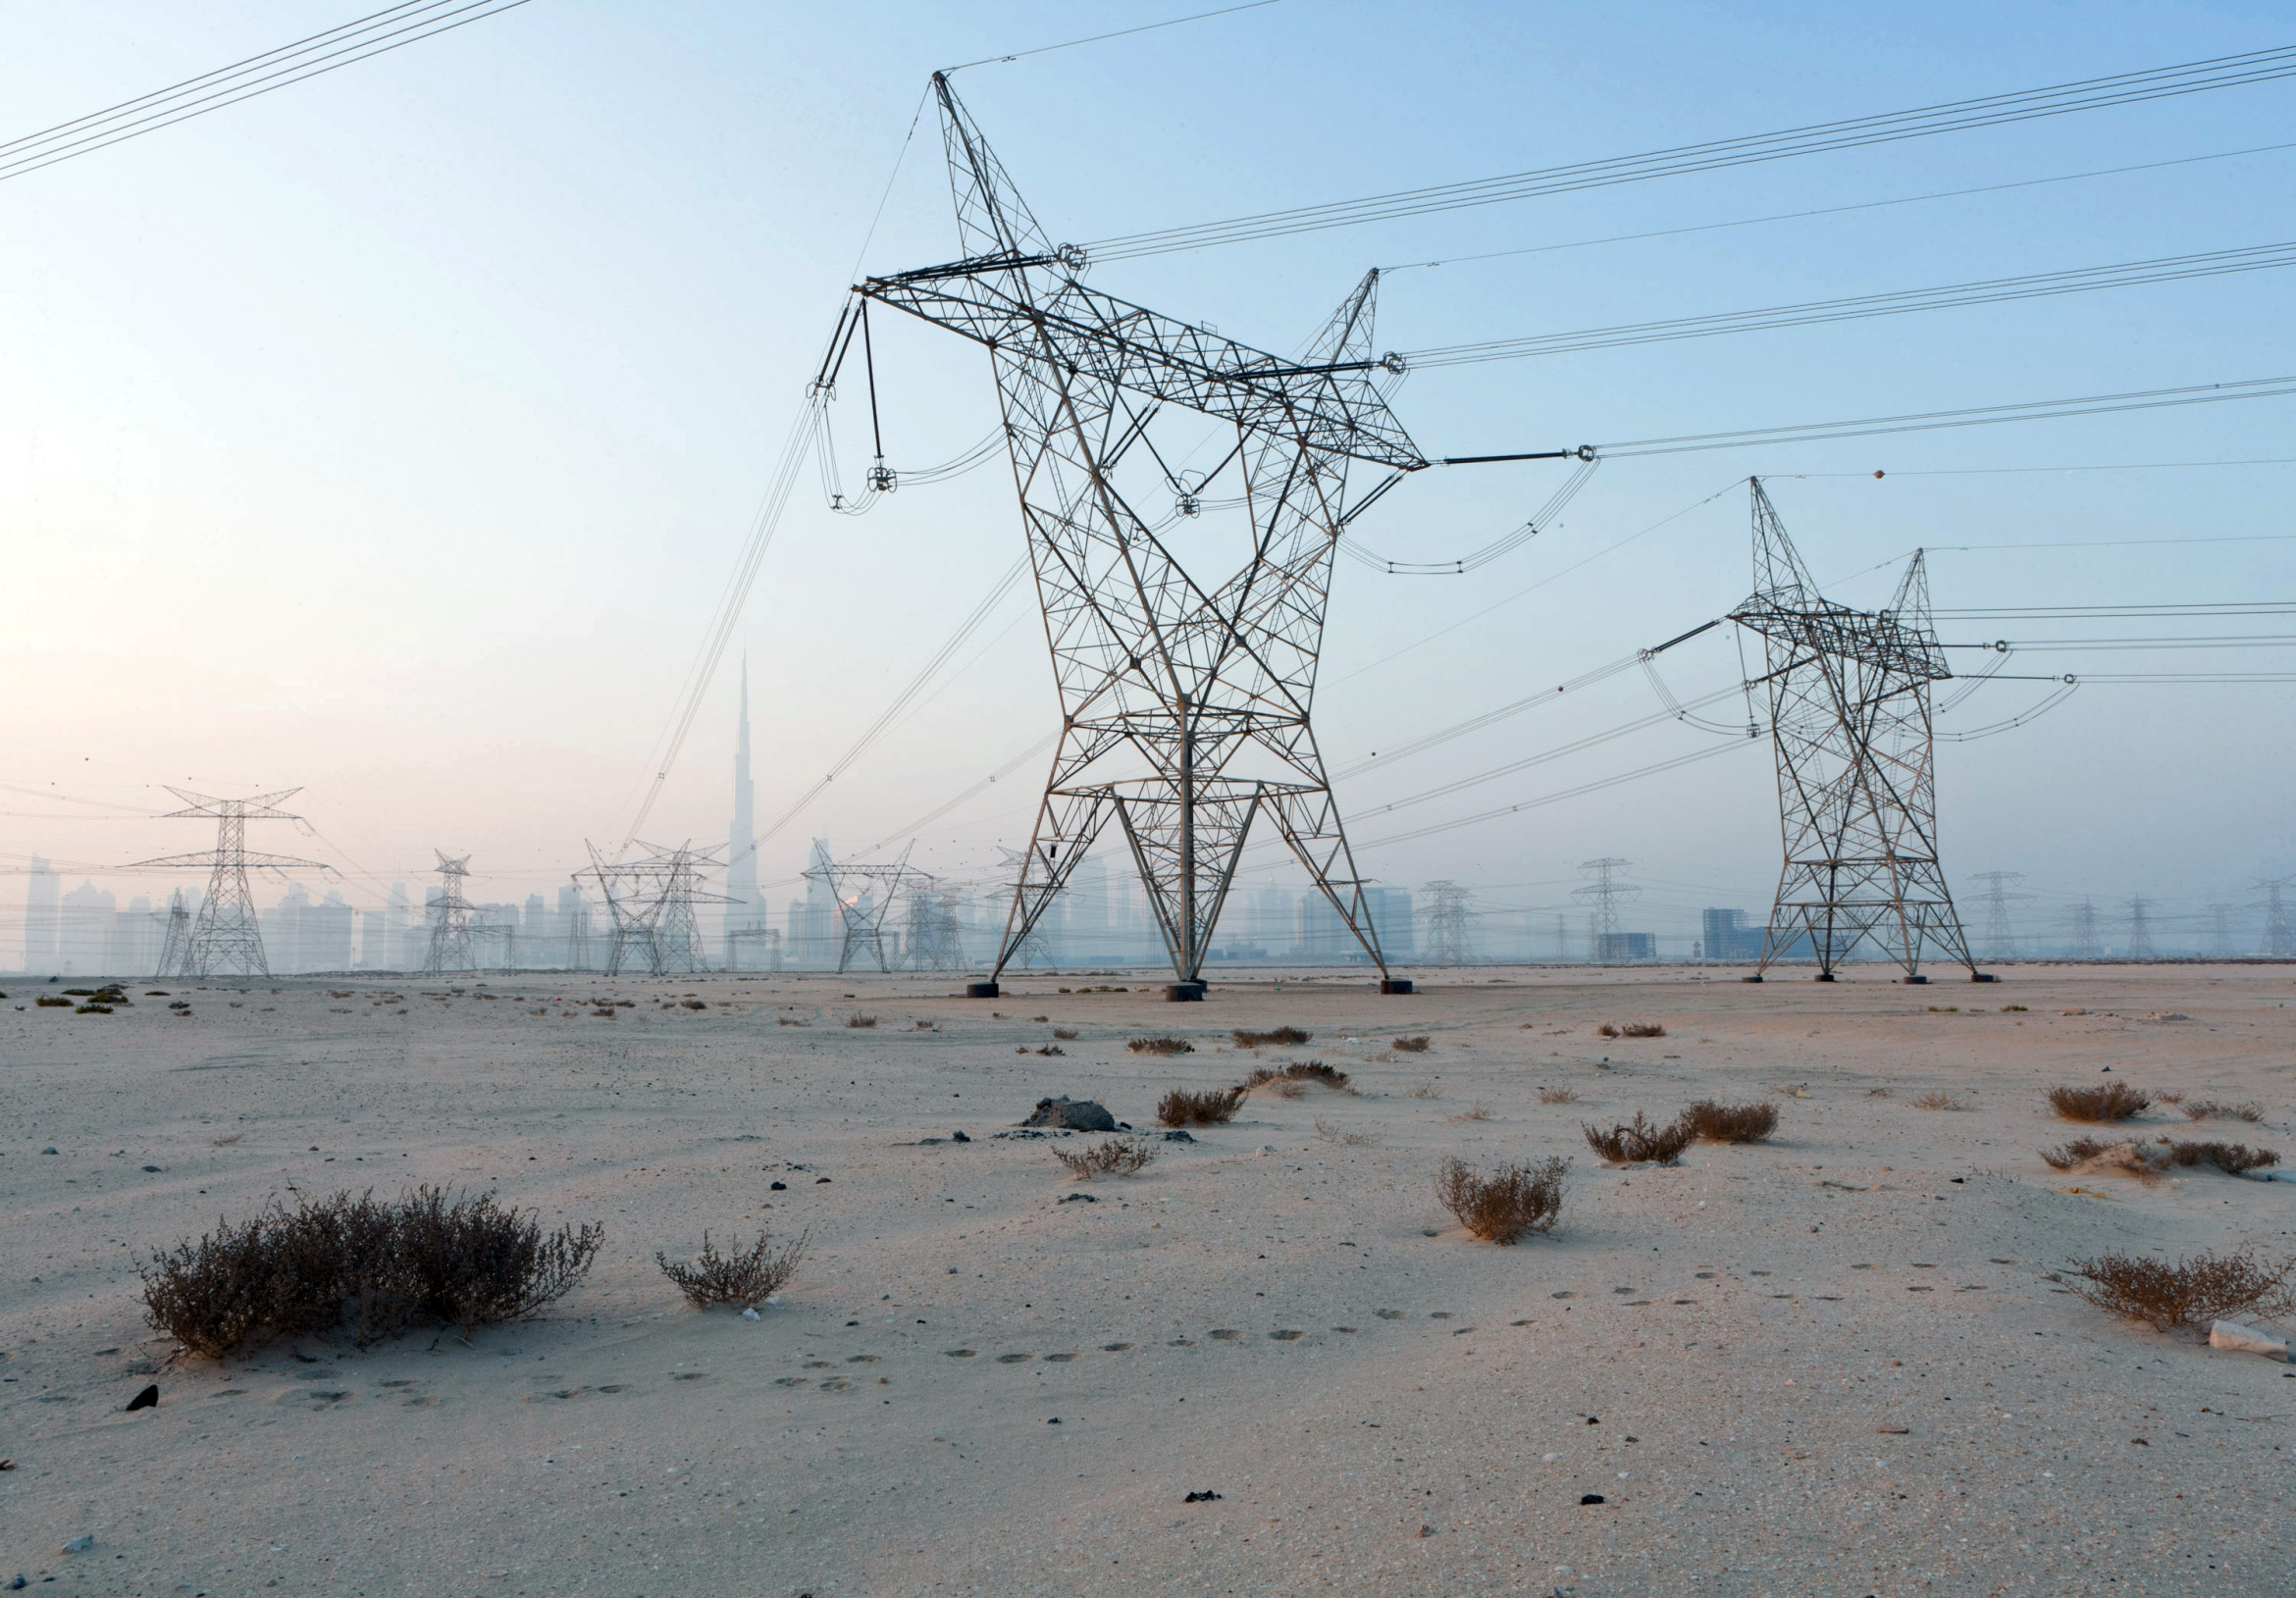 Electricity power lines operated by Dubai Electricity and Water Authority,&nbsp;in the desert near Dubai, United Arab Emirates.